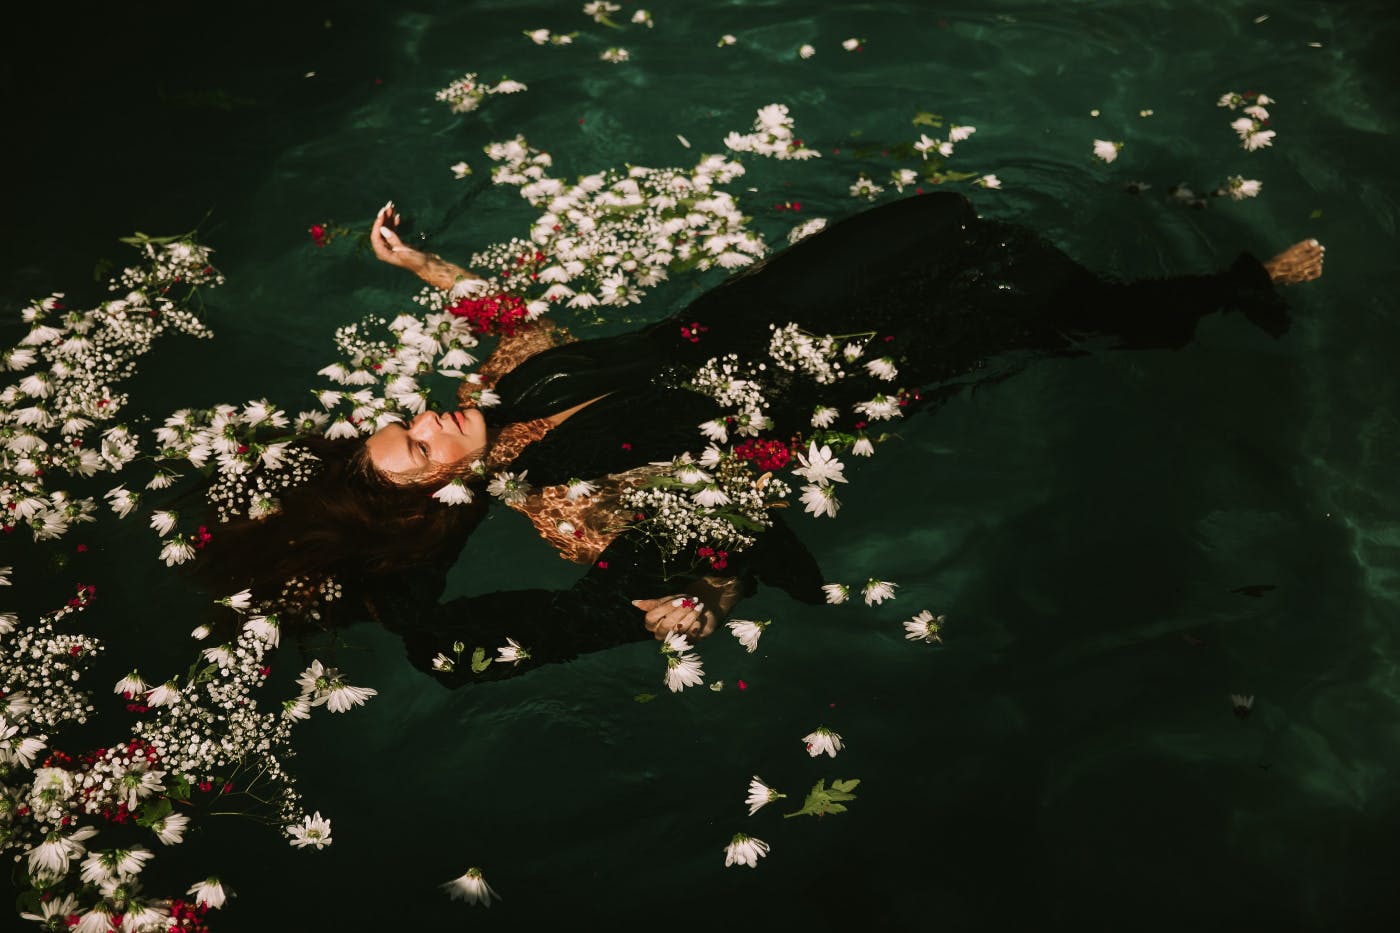 Ophelia floating in a pond with flowers